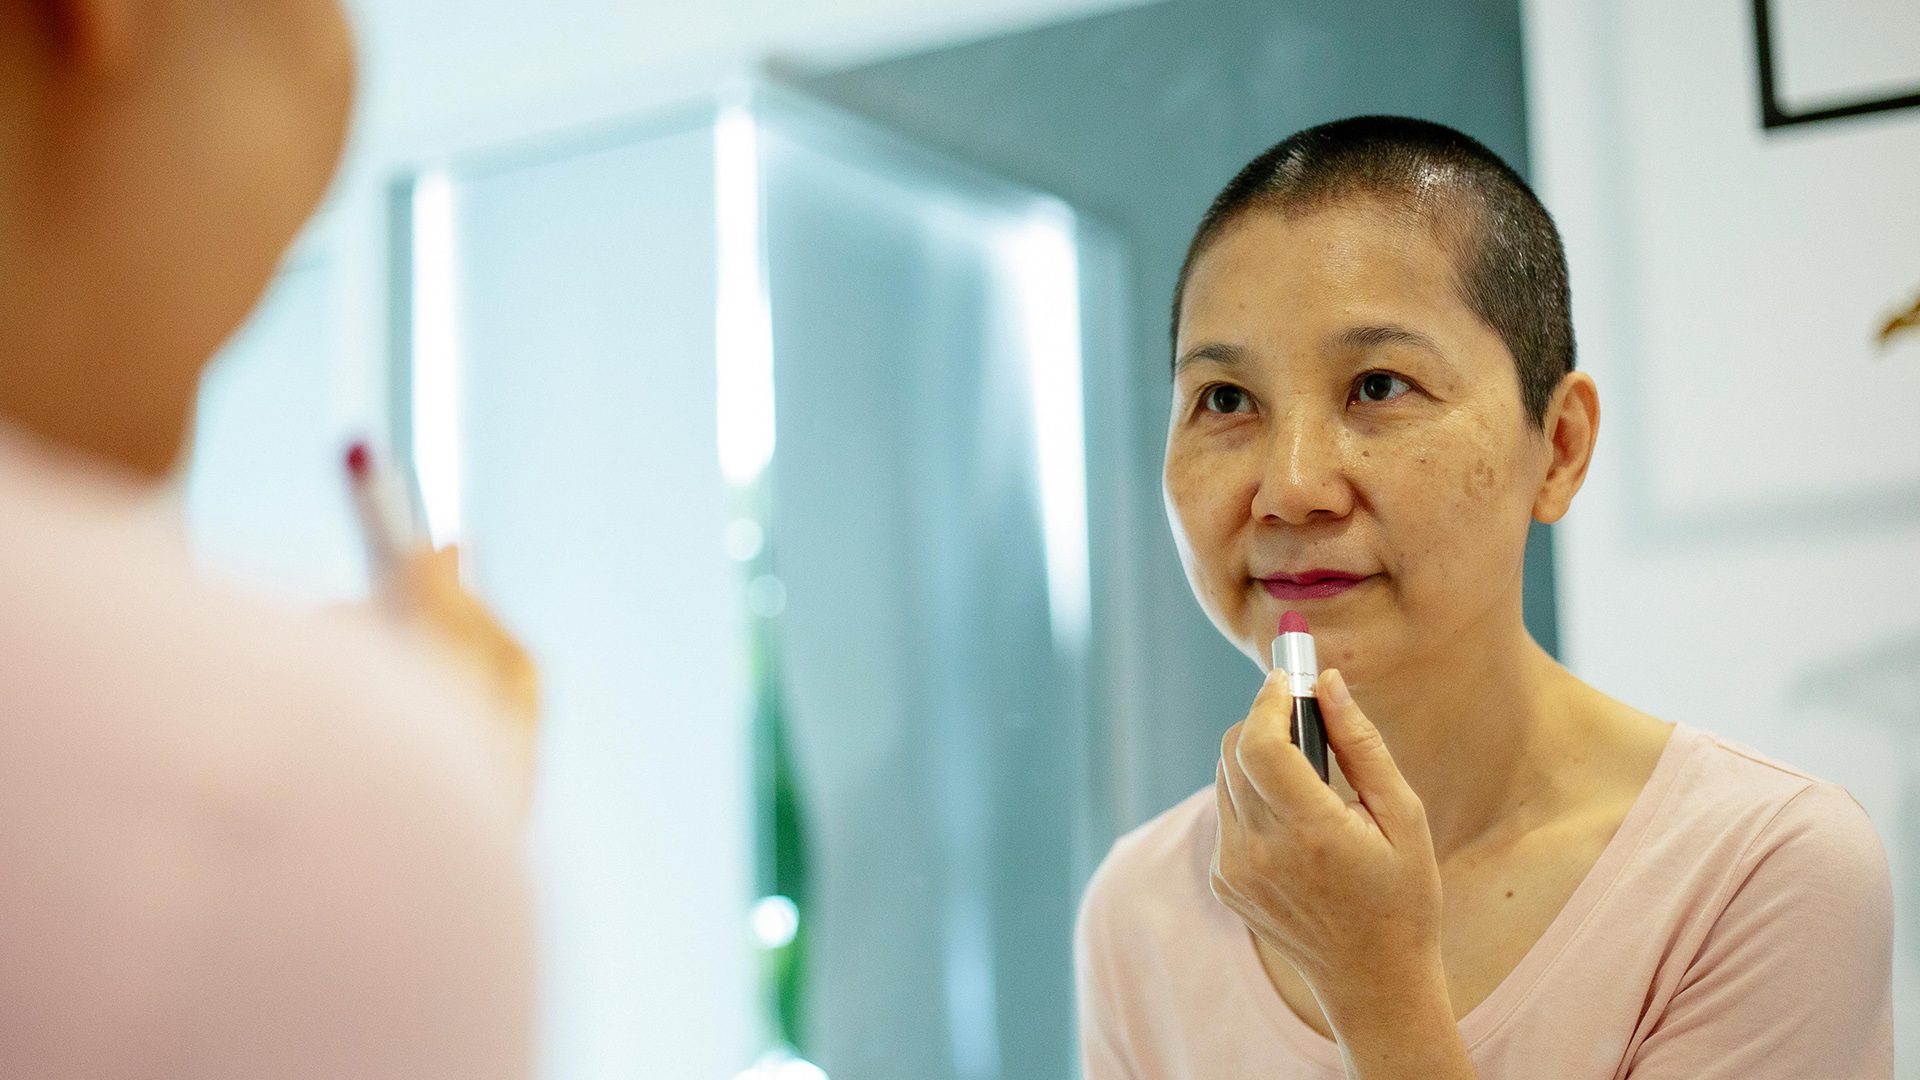 A middle aged woman with cancer applying lipstick in the mirror